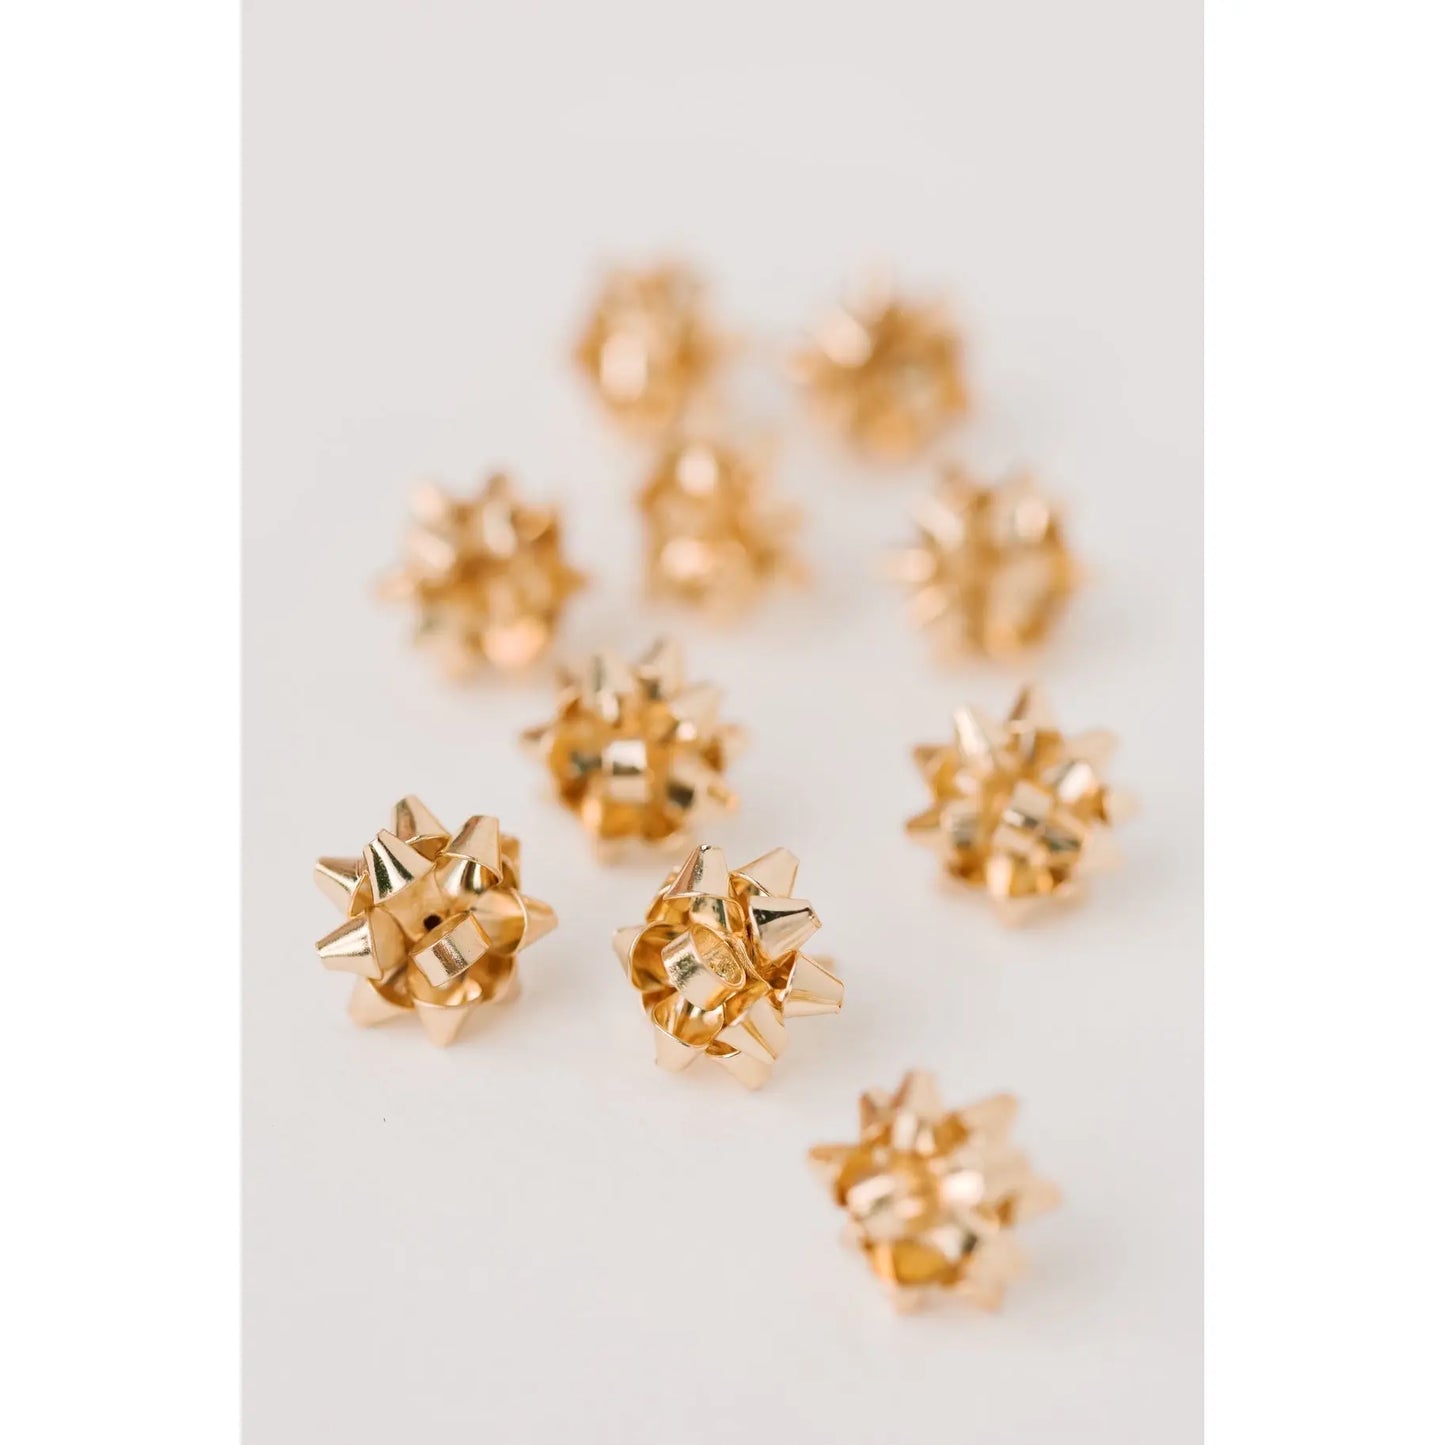 The Tiny Details Christmas Present Bow Stud Earrings